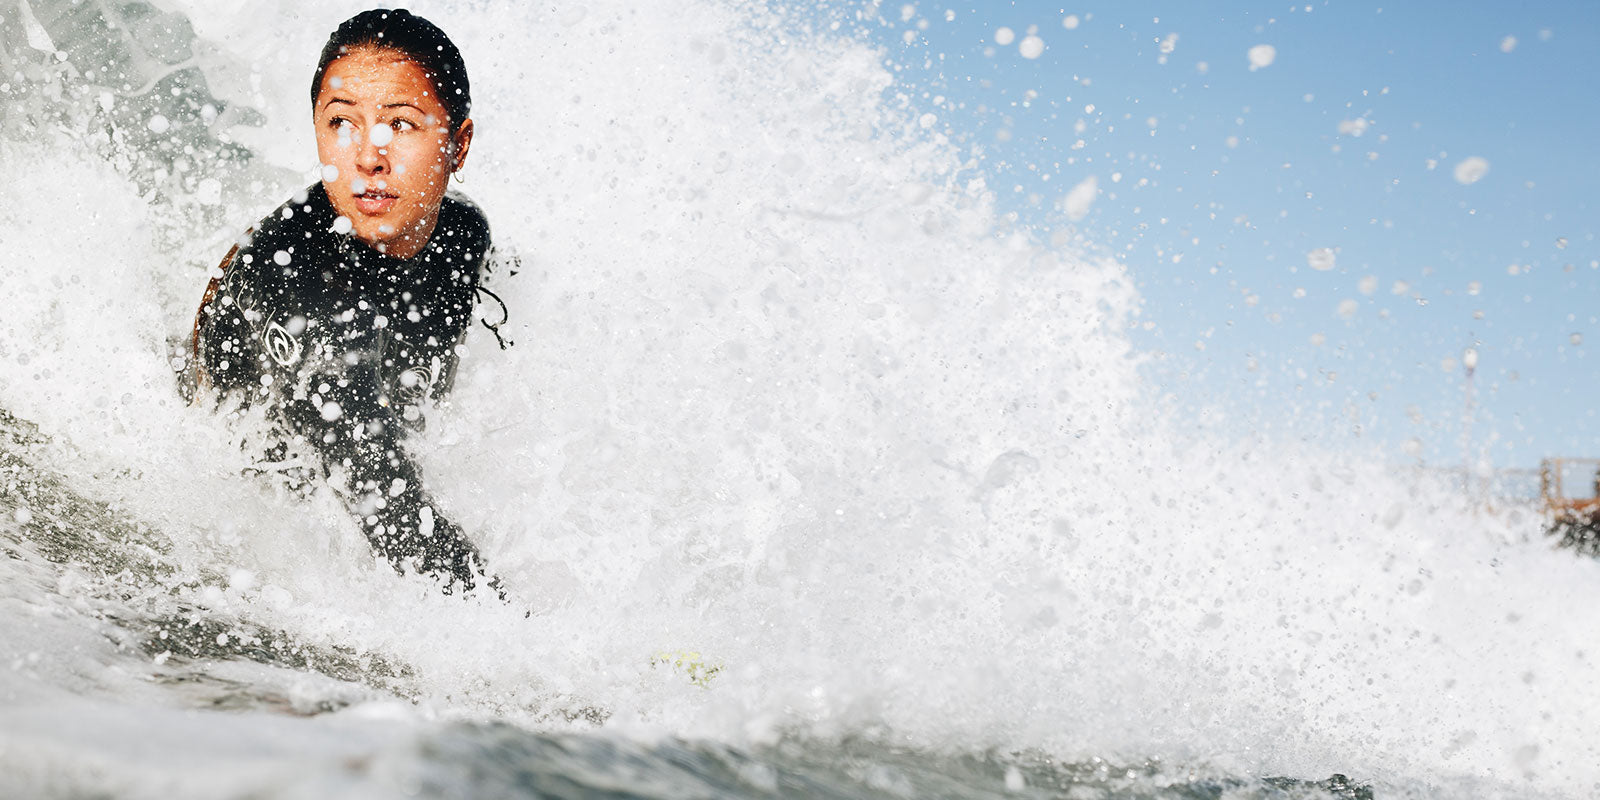 22 Fun Facts You Didn't Know About 3 Time World Bodysurfing Champion Makena Magro